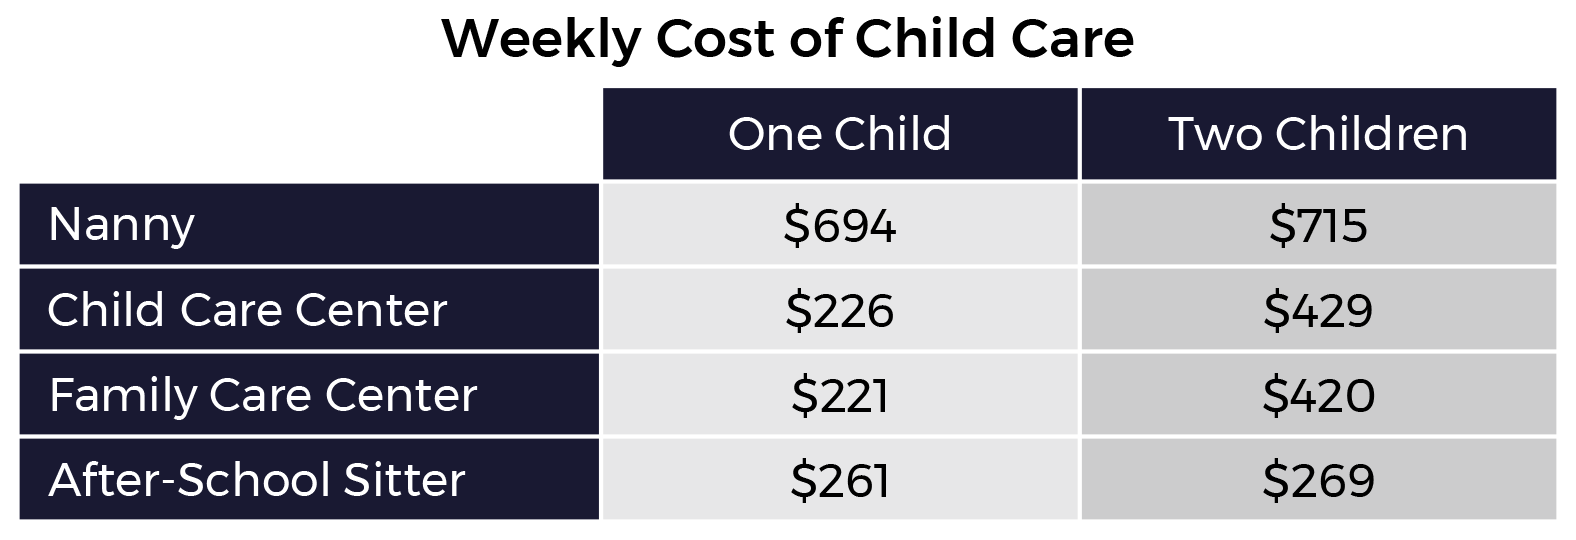 Weekly Cost of Child Care Chart Displaying One Child Versus Two